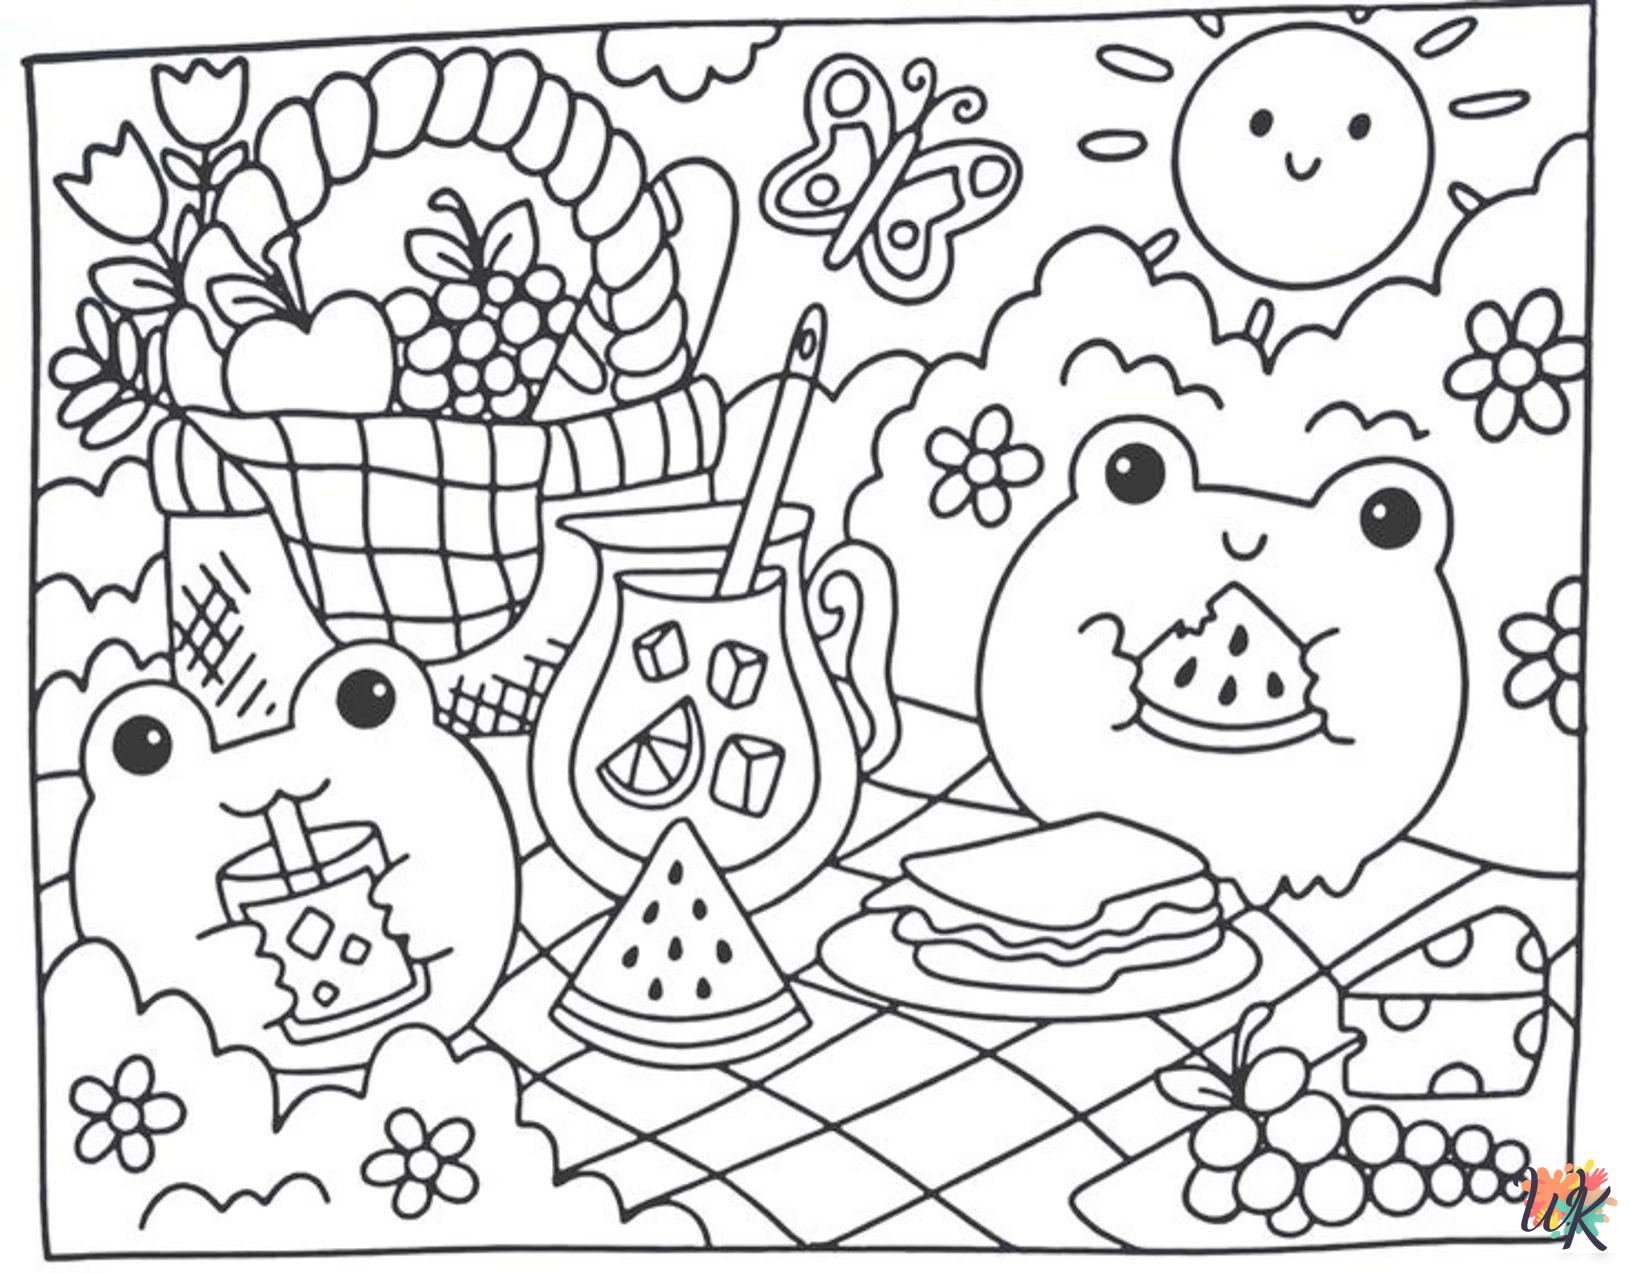 Bobbie Goods cards coloring pages